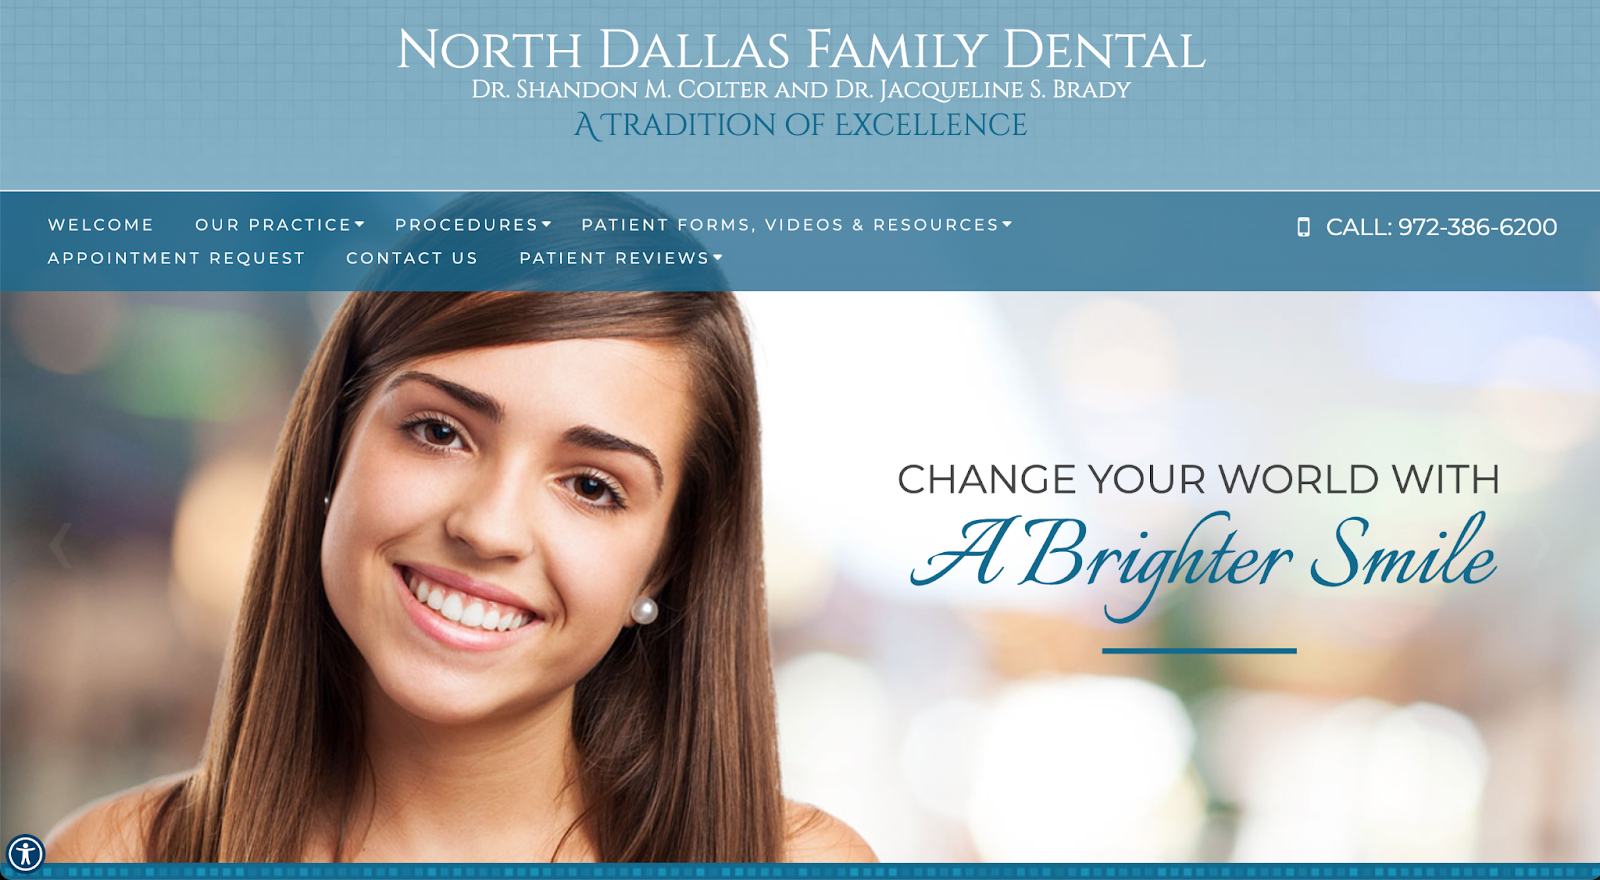 Content is front and center in this dental website design for the Dallas Family Dental practice